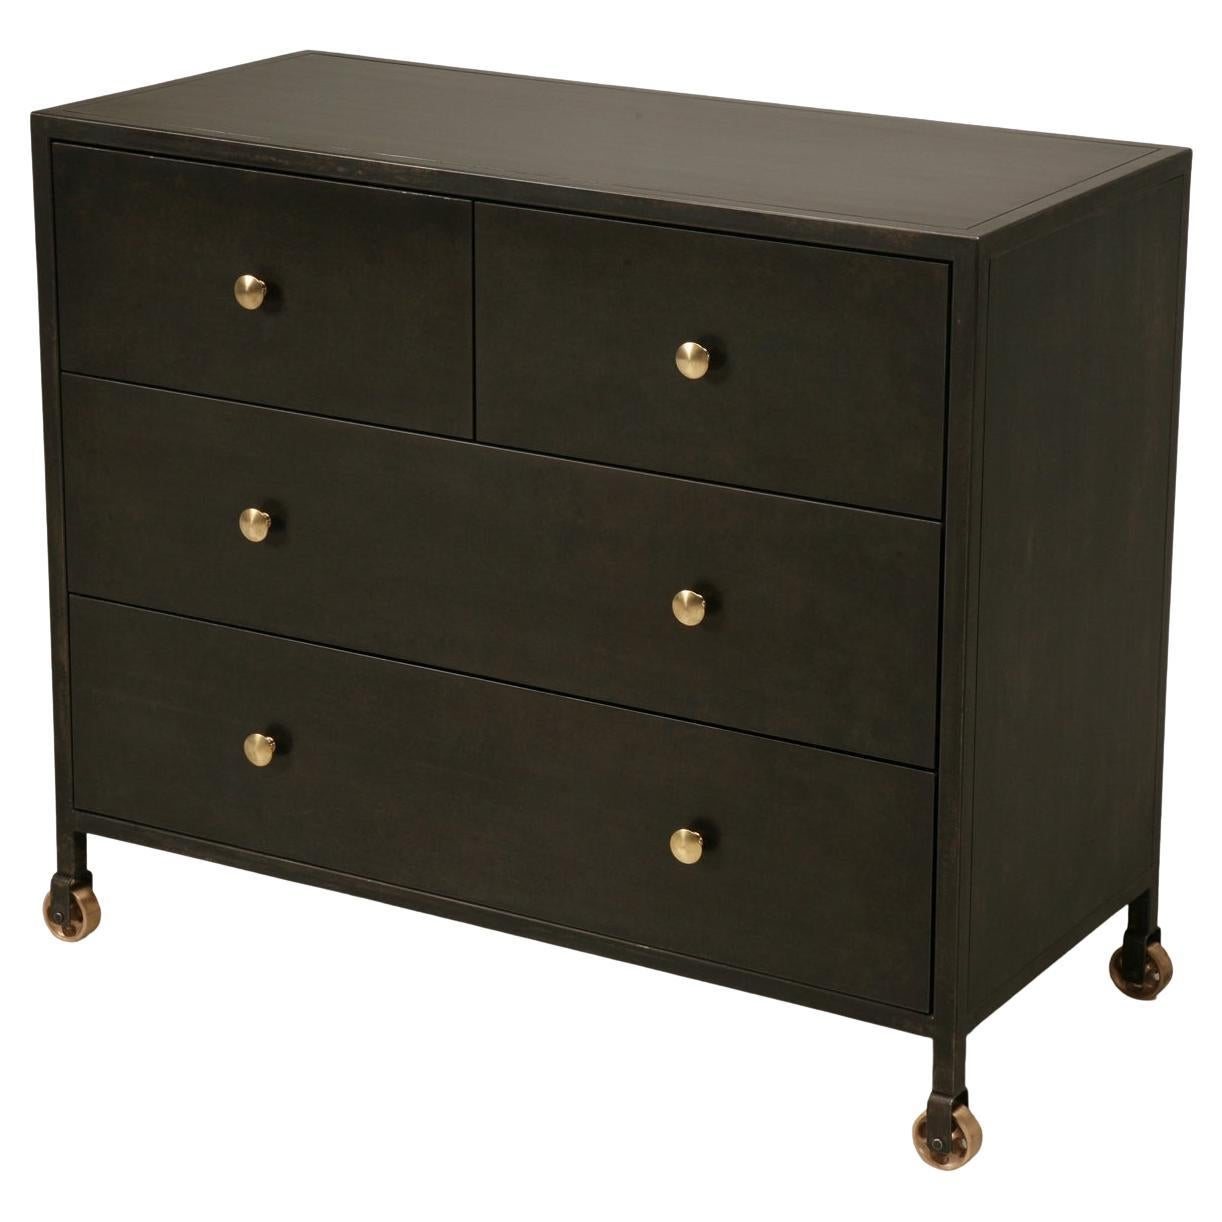 Steel Clad Commode, Chest, Dresser, Bathroom Vanity Custom Made to Order Chicago For Sale